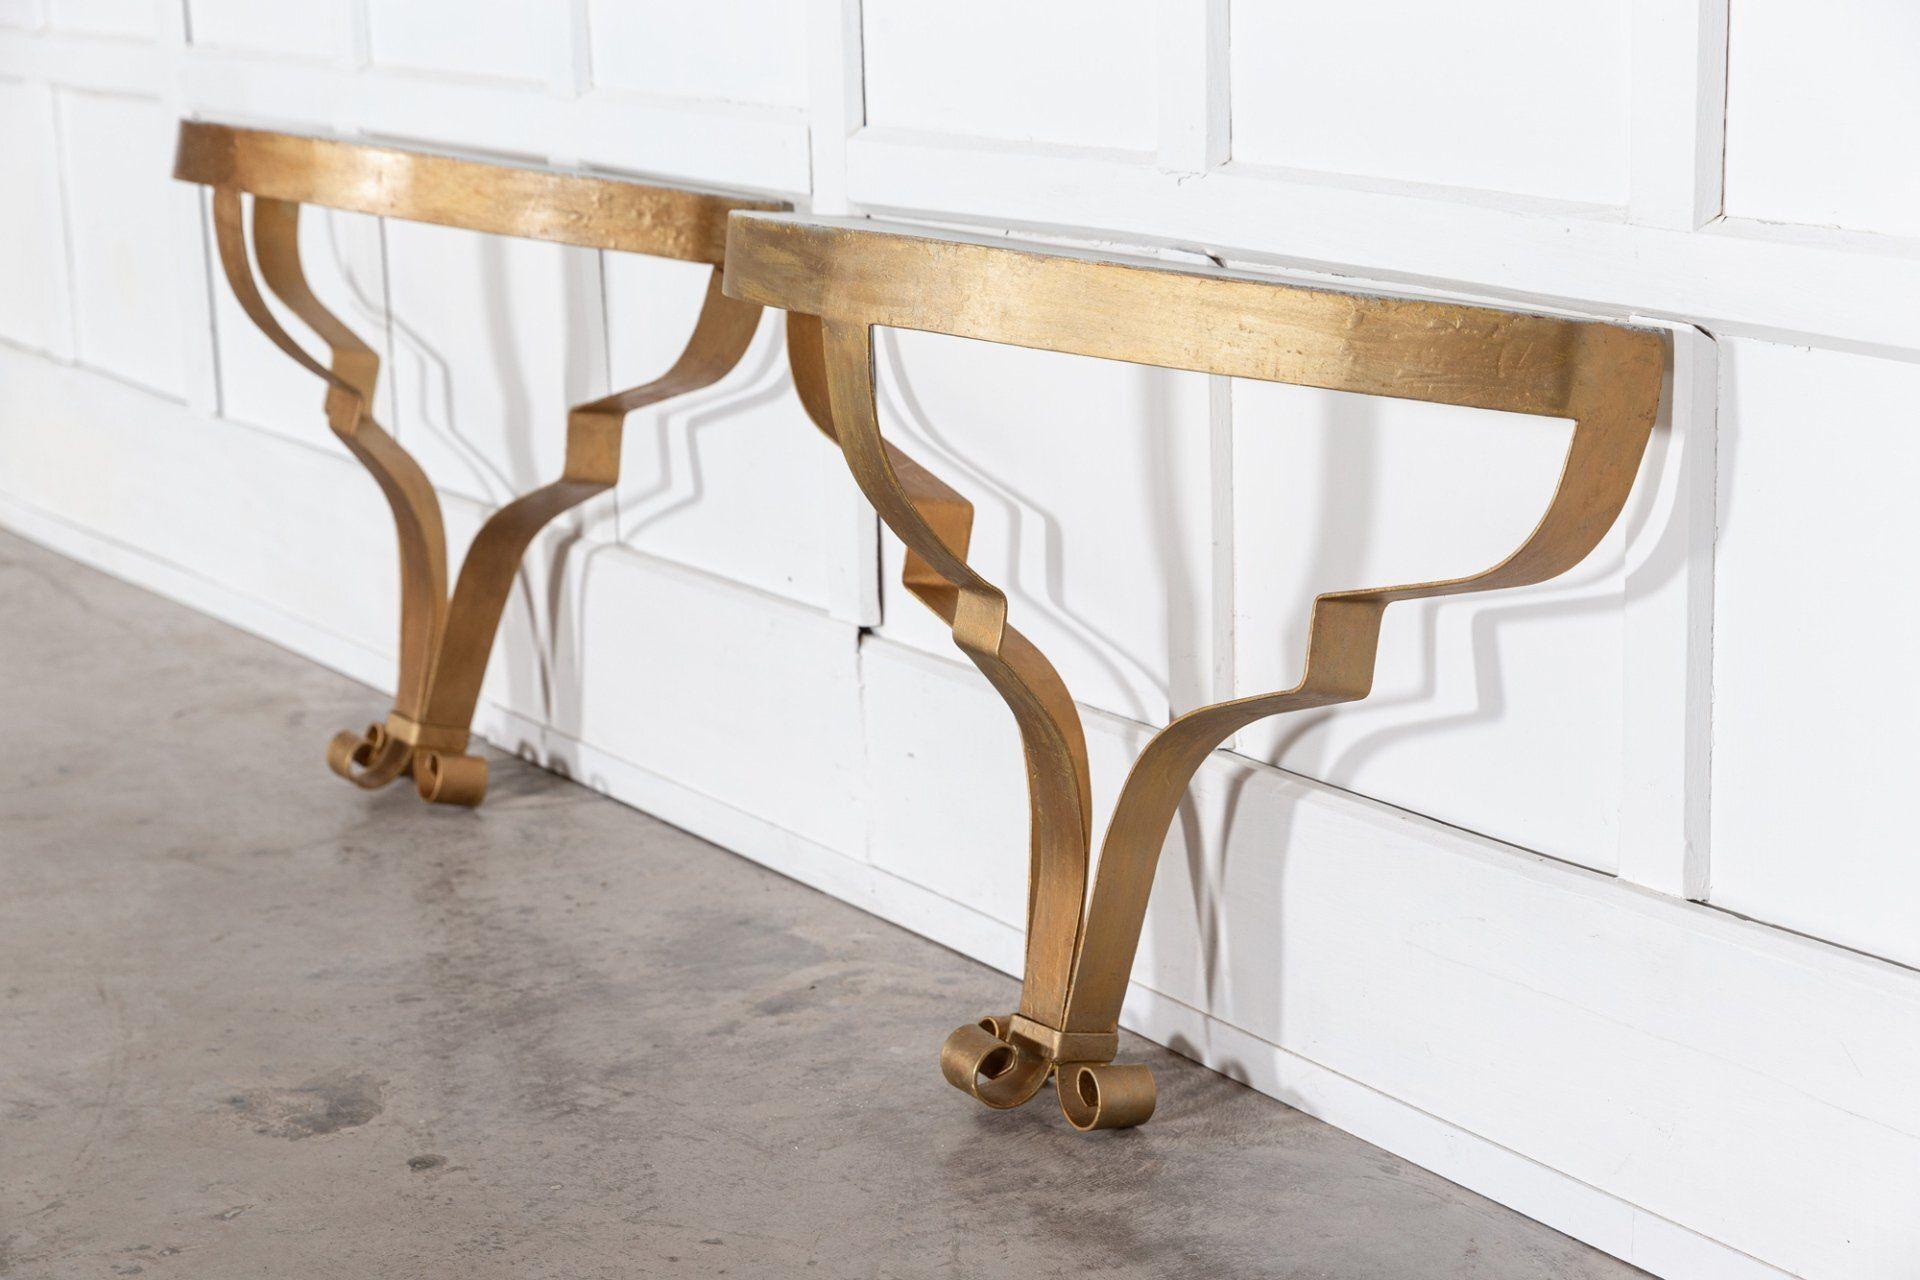 circa late 20thC
Pair of gilt metal console tables with simulated marble tops from a prominent film and theatre prop house.
Price per pair

W80 x D27 x H57 cm.